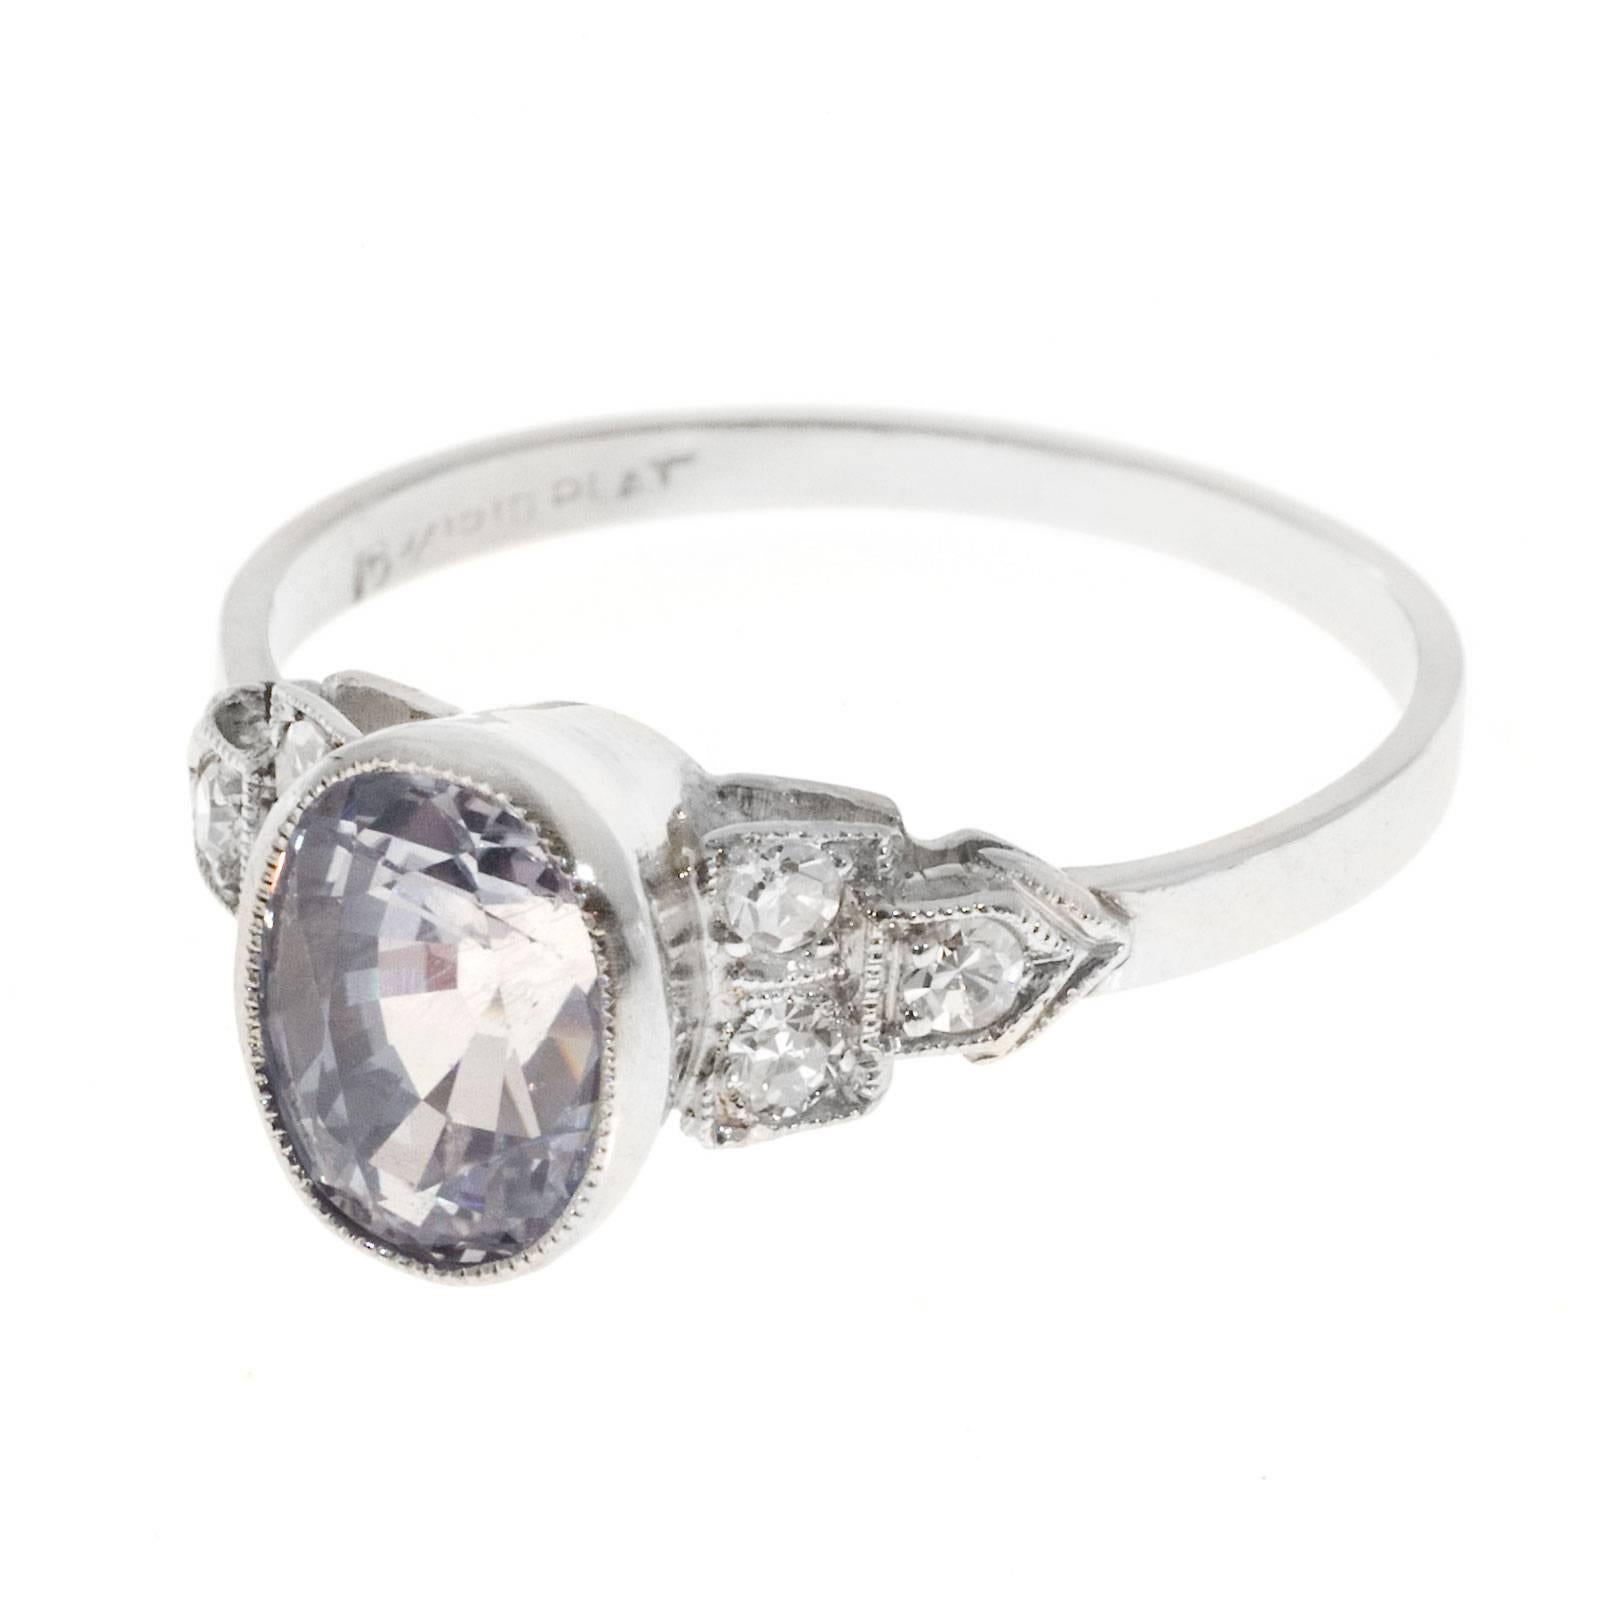 Oval very light pink blue Sapphire Art Deco engagement ring circa 1930 to 1940. In a platinum setting with 6 side diamonds.

1 oval near colorless very light pinkish blue Sapphire, approx. total weight 2.06cts, VS2, 7.87 x 5.74 x 5.12mm, Simple heat